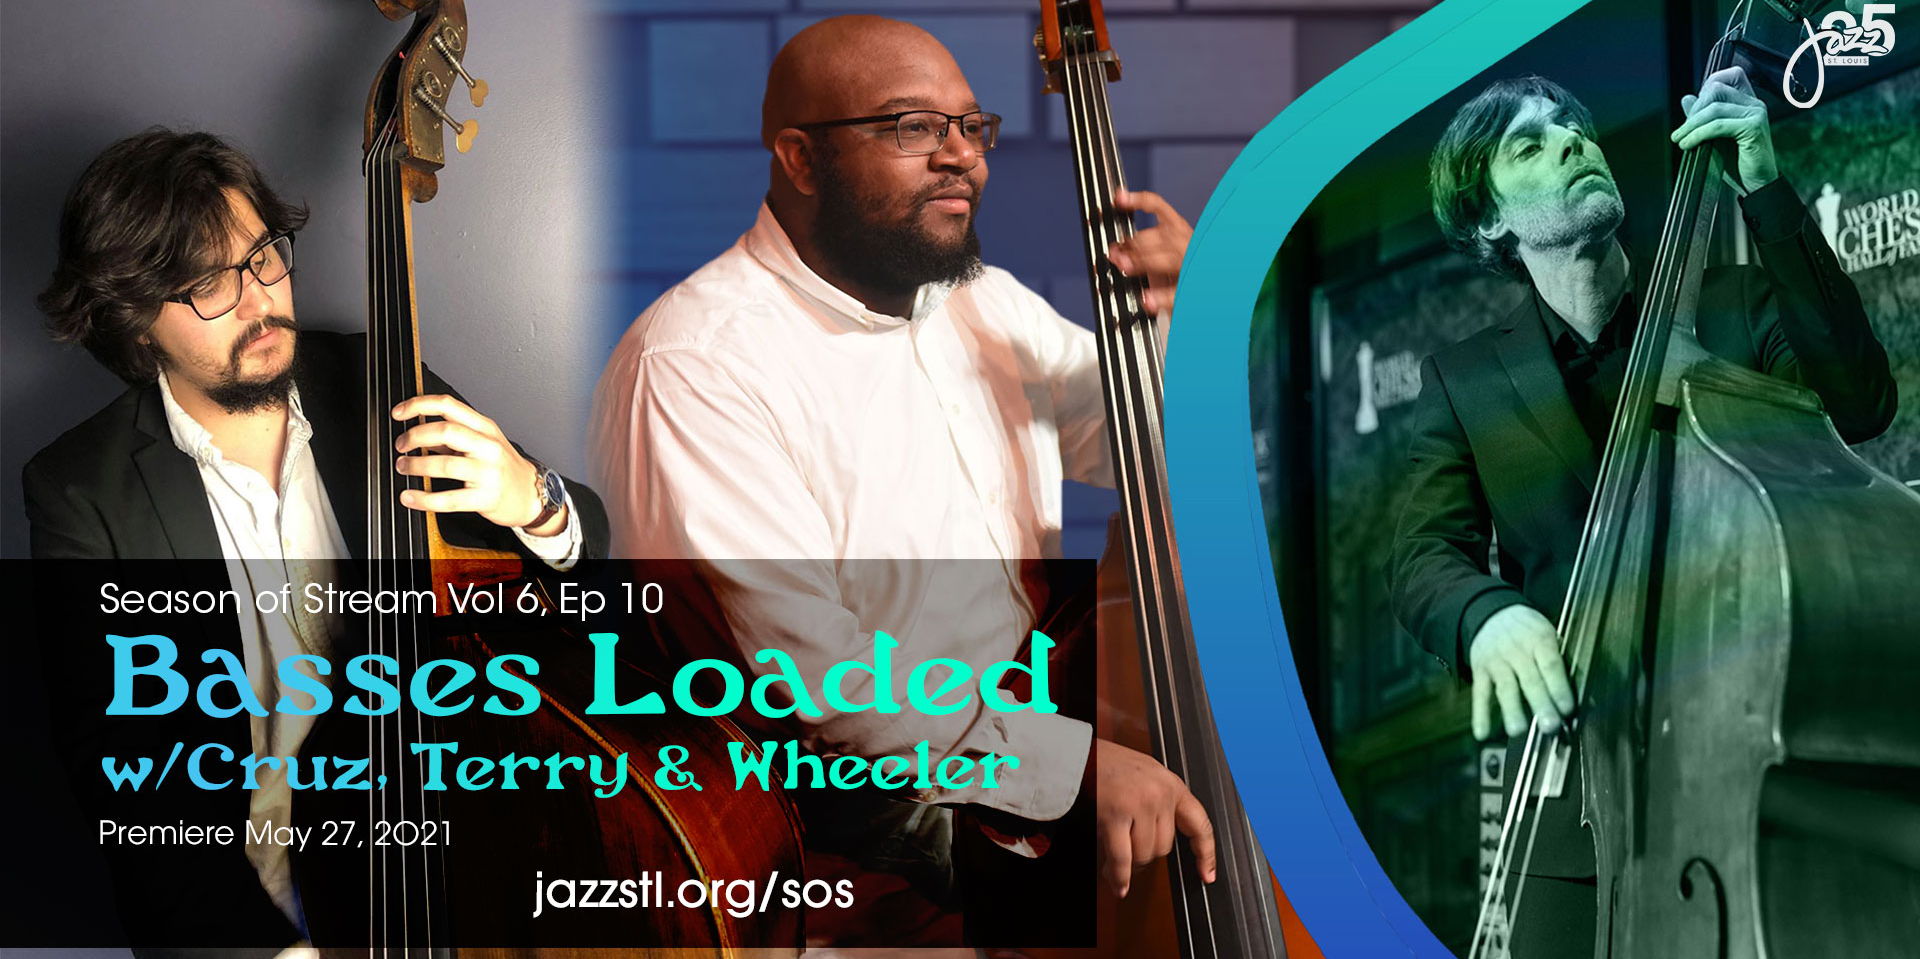 Season of Stream Vol 6, Ep 10 | Basses Loaded with Cruz, Terry & Wheeler  promotional image